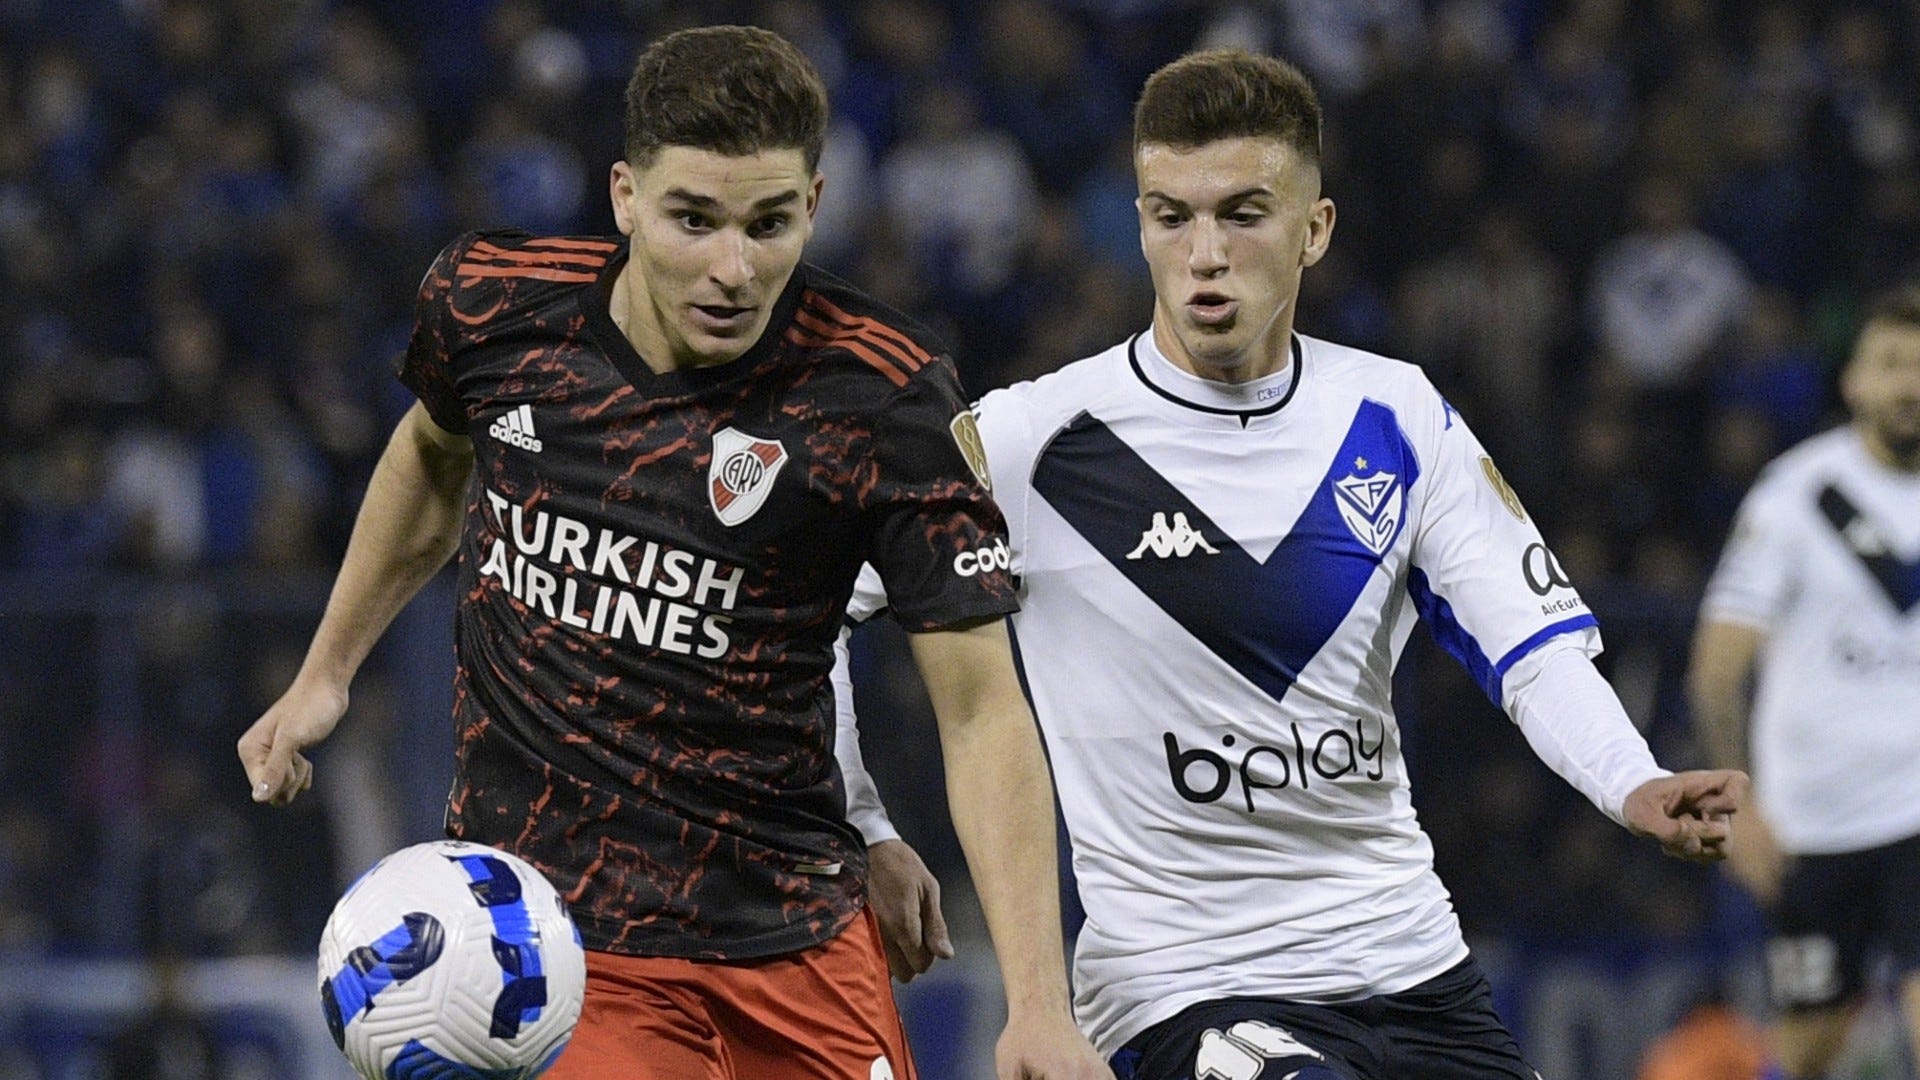 Maximo Pironi, from Velez to Manchester City: transfer price, travel time and where he will play